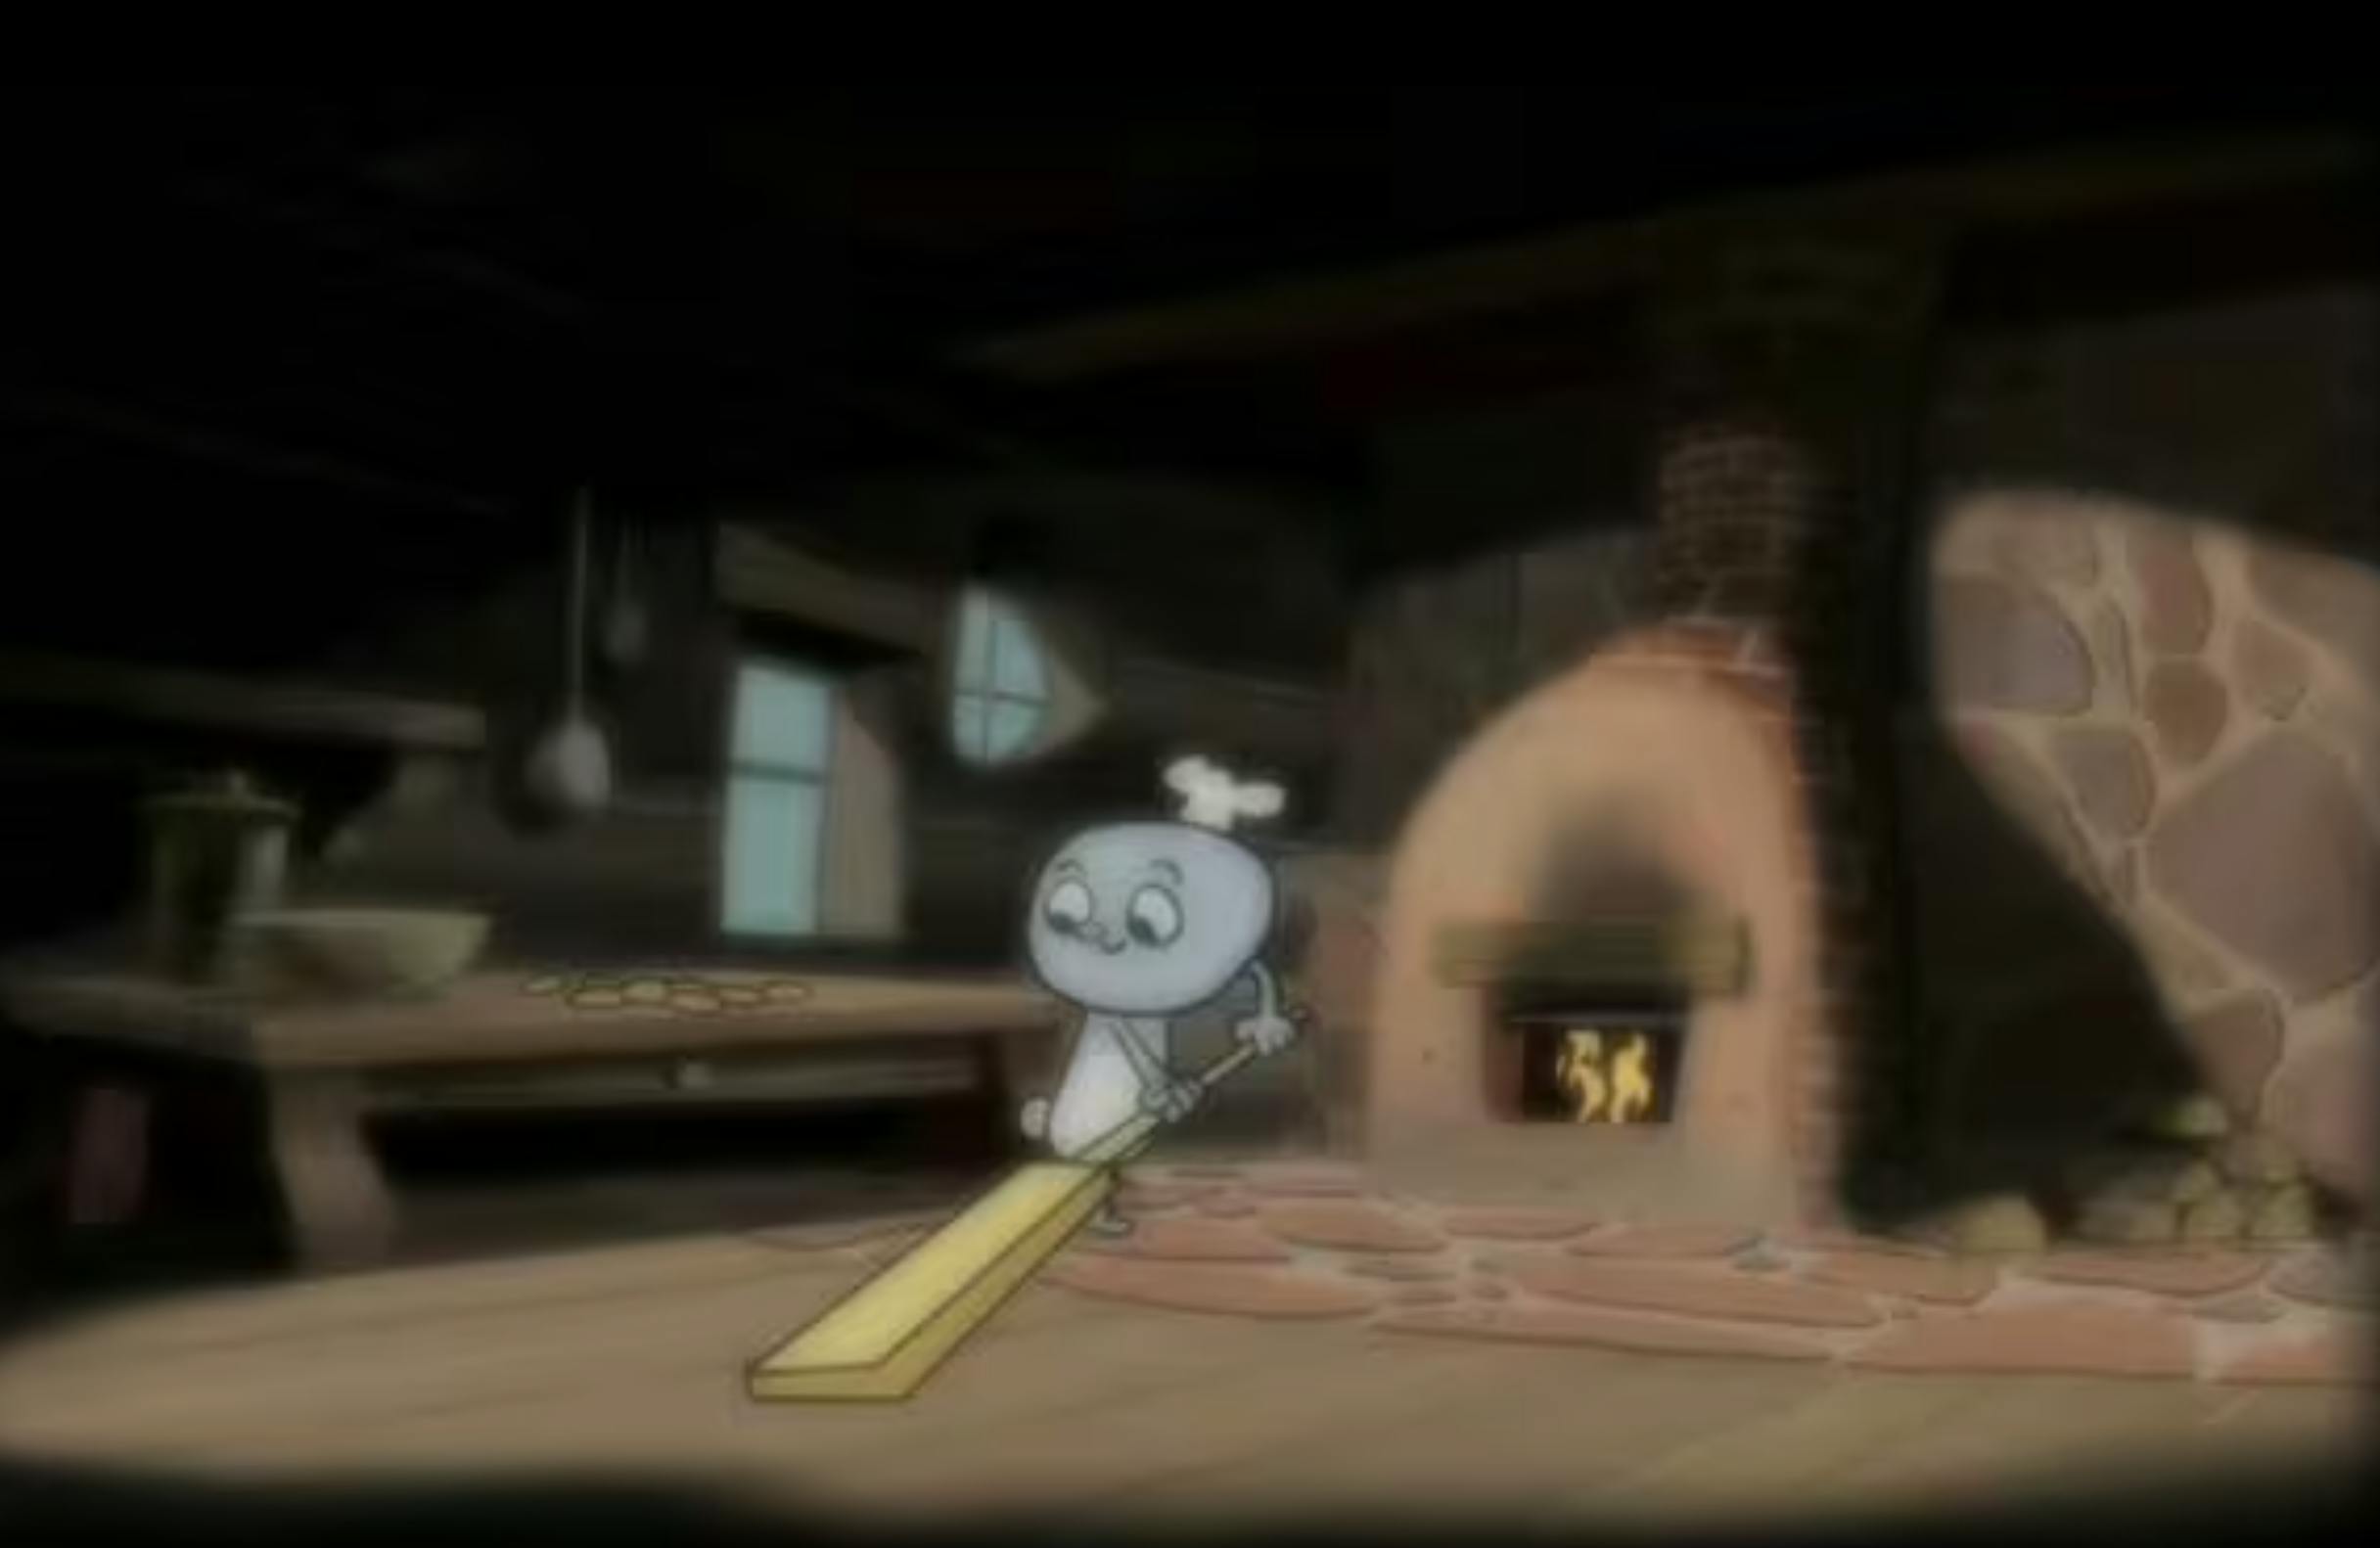 Image of a cute blue character wear ing a chef hat lifting a large yellow oven spatula into a pizza over in a small cabin. 